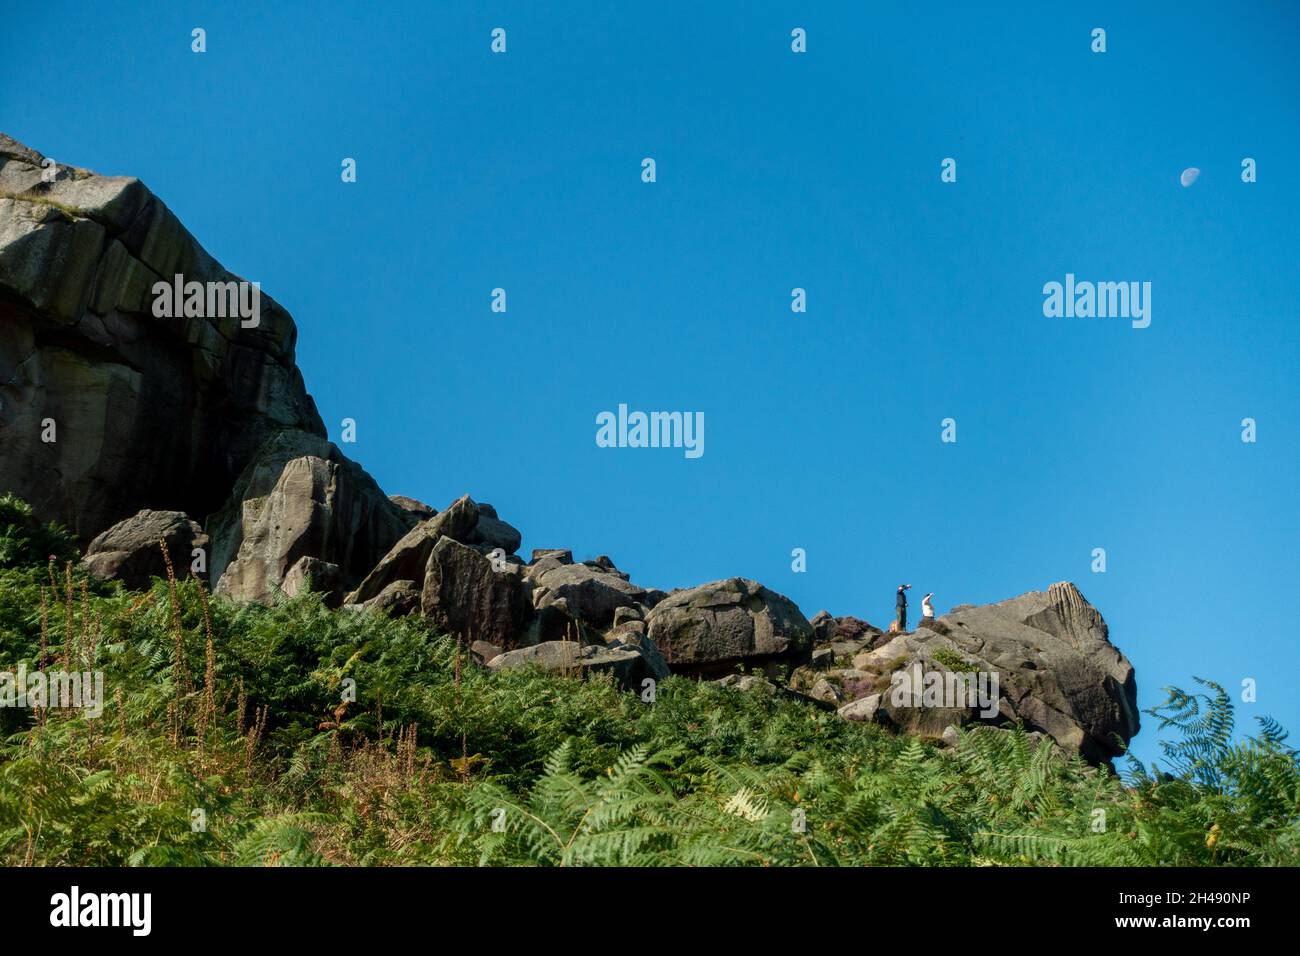 People pointing from a viewpoint on the Cow and Calf Rocks with the moon in the sky, West Yorkshire, UK Stock Photo